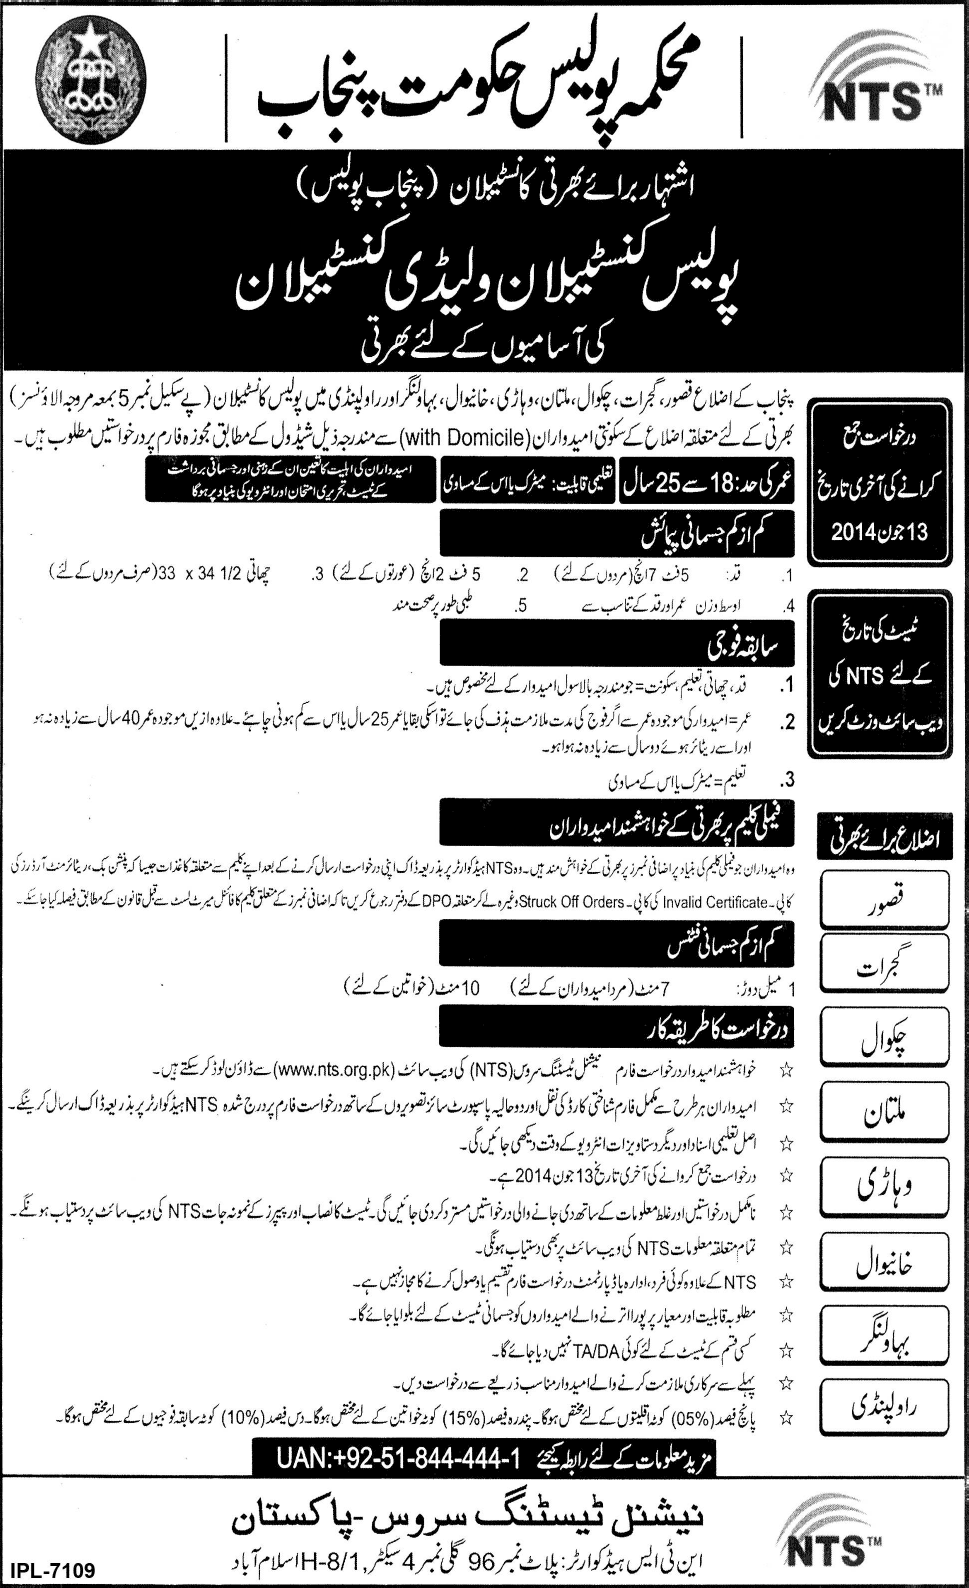 Constable Jobs in Punjab Police 2014 June Pakistan Latest / New Advertisement by NTS